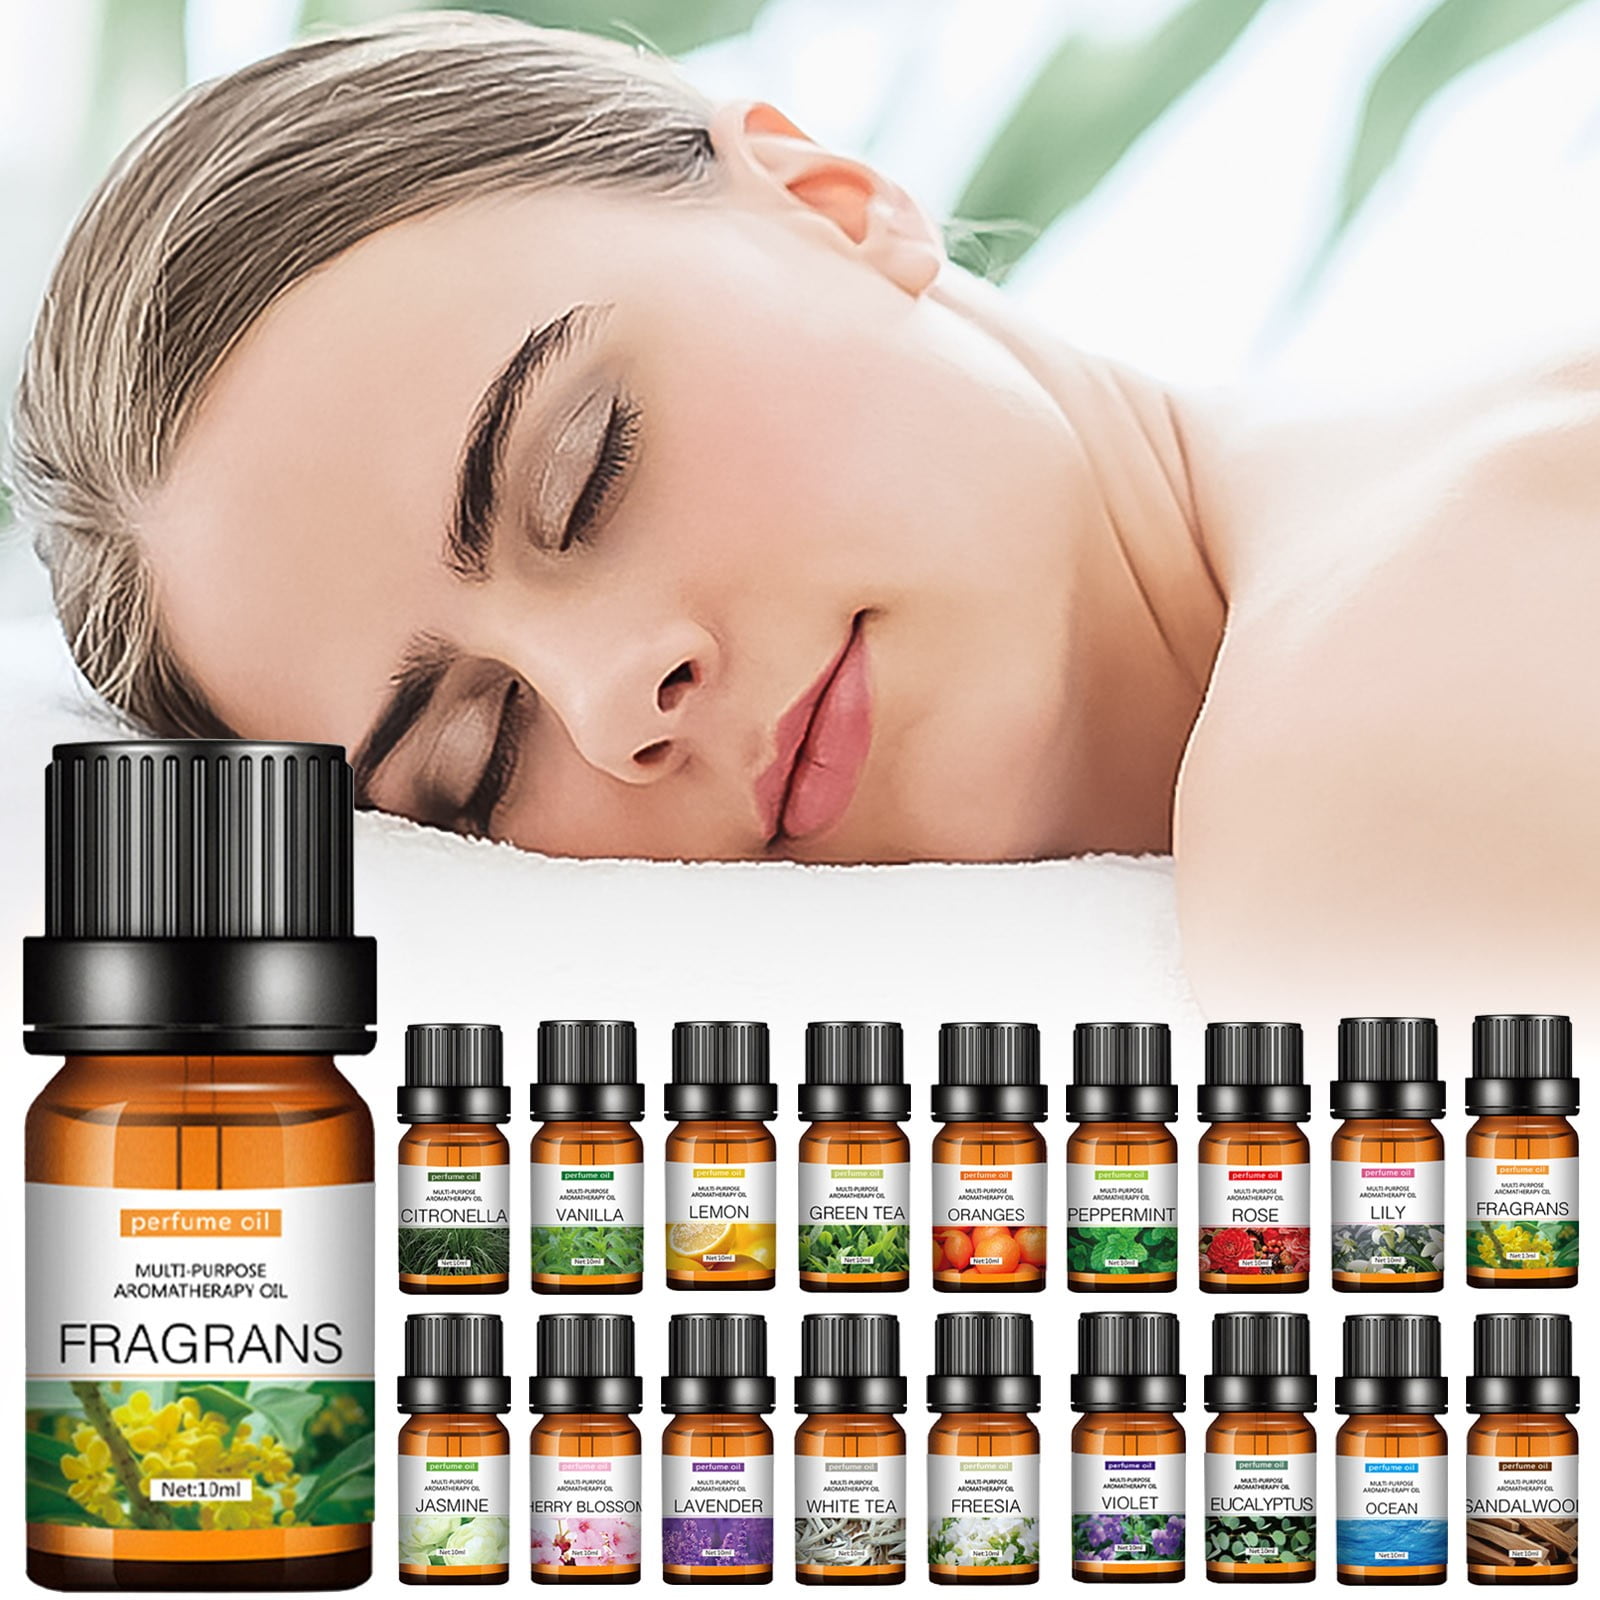 JASMINE OIL 100% Natural Cold Pressed Carrier Oil ( NOT ESSENTIAL OIL ) 0.5  Fl.oz.- 15 ml. for Face, Skin, Body, Hair and Nail Care, Anti - aging Face